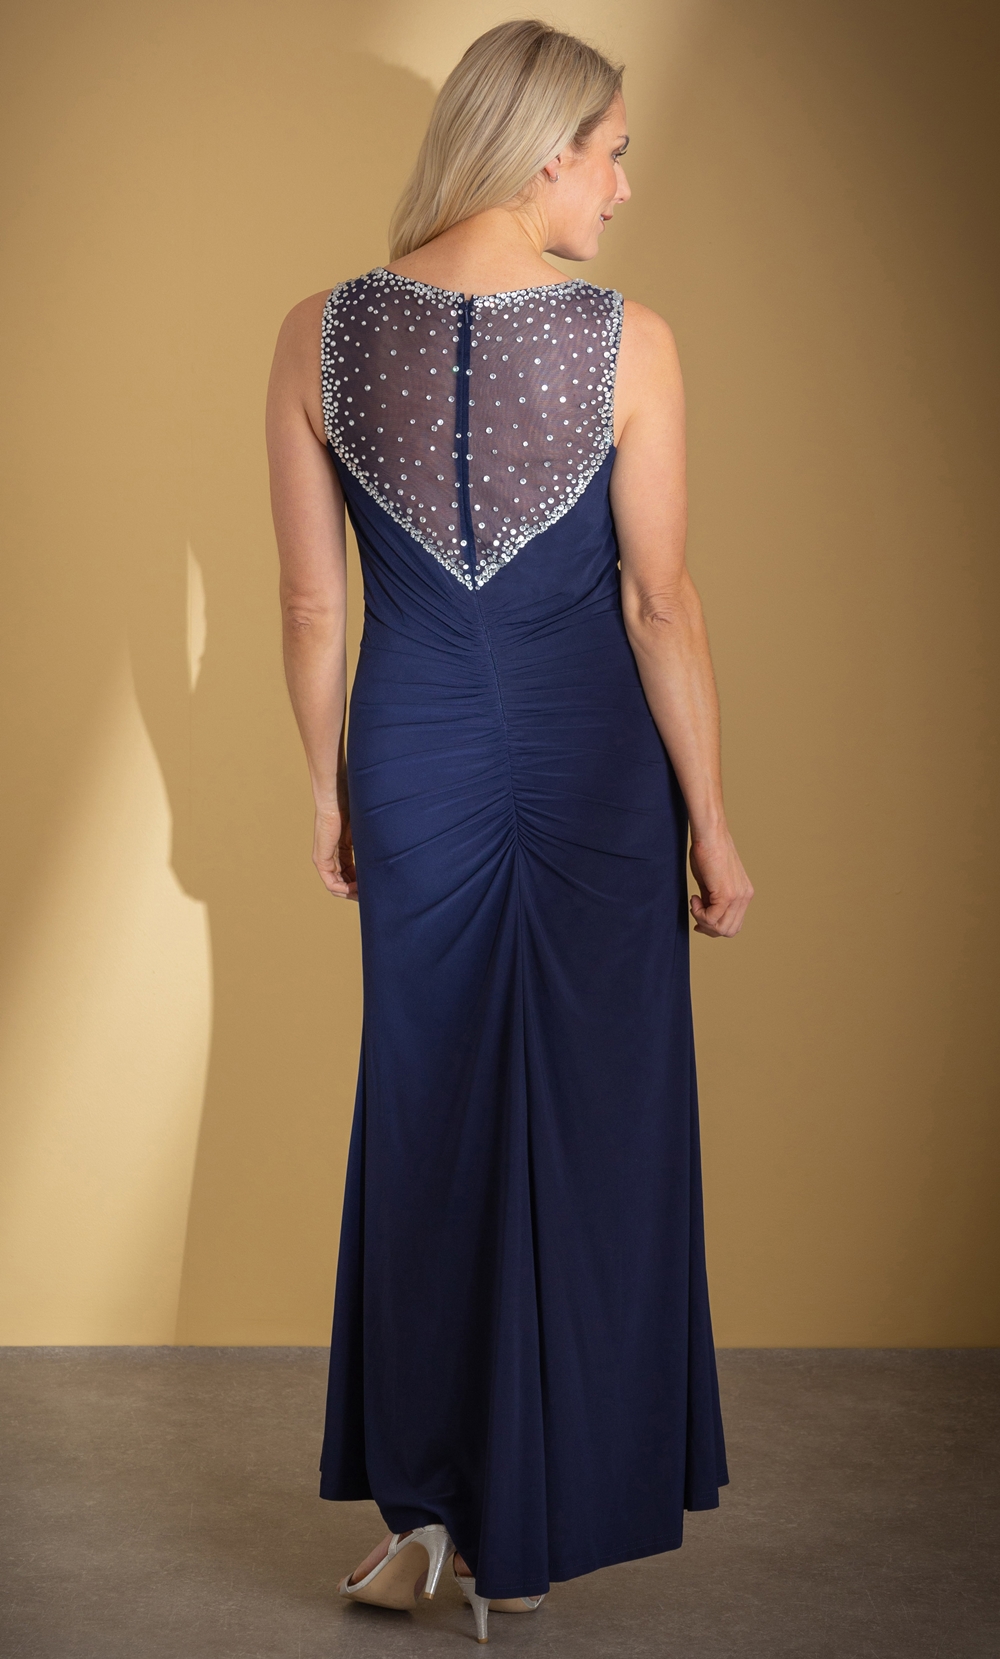 Faceted Crystal Luxury Maxi Dress